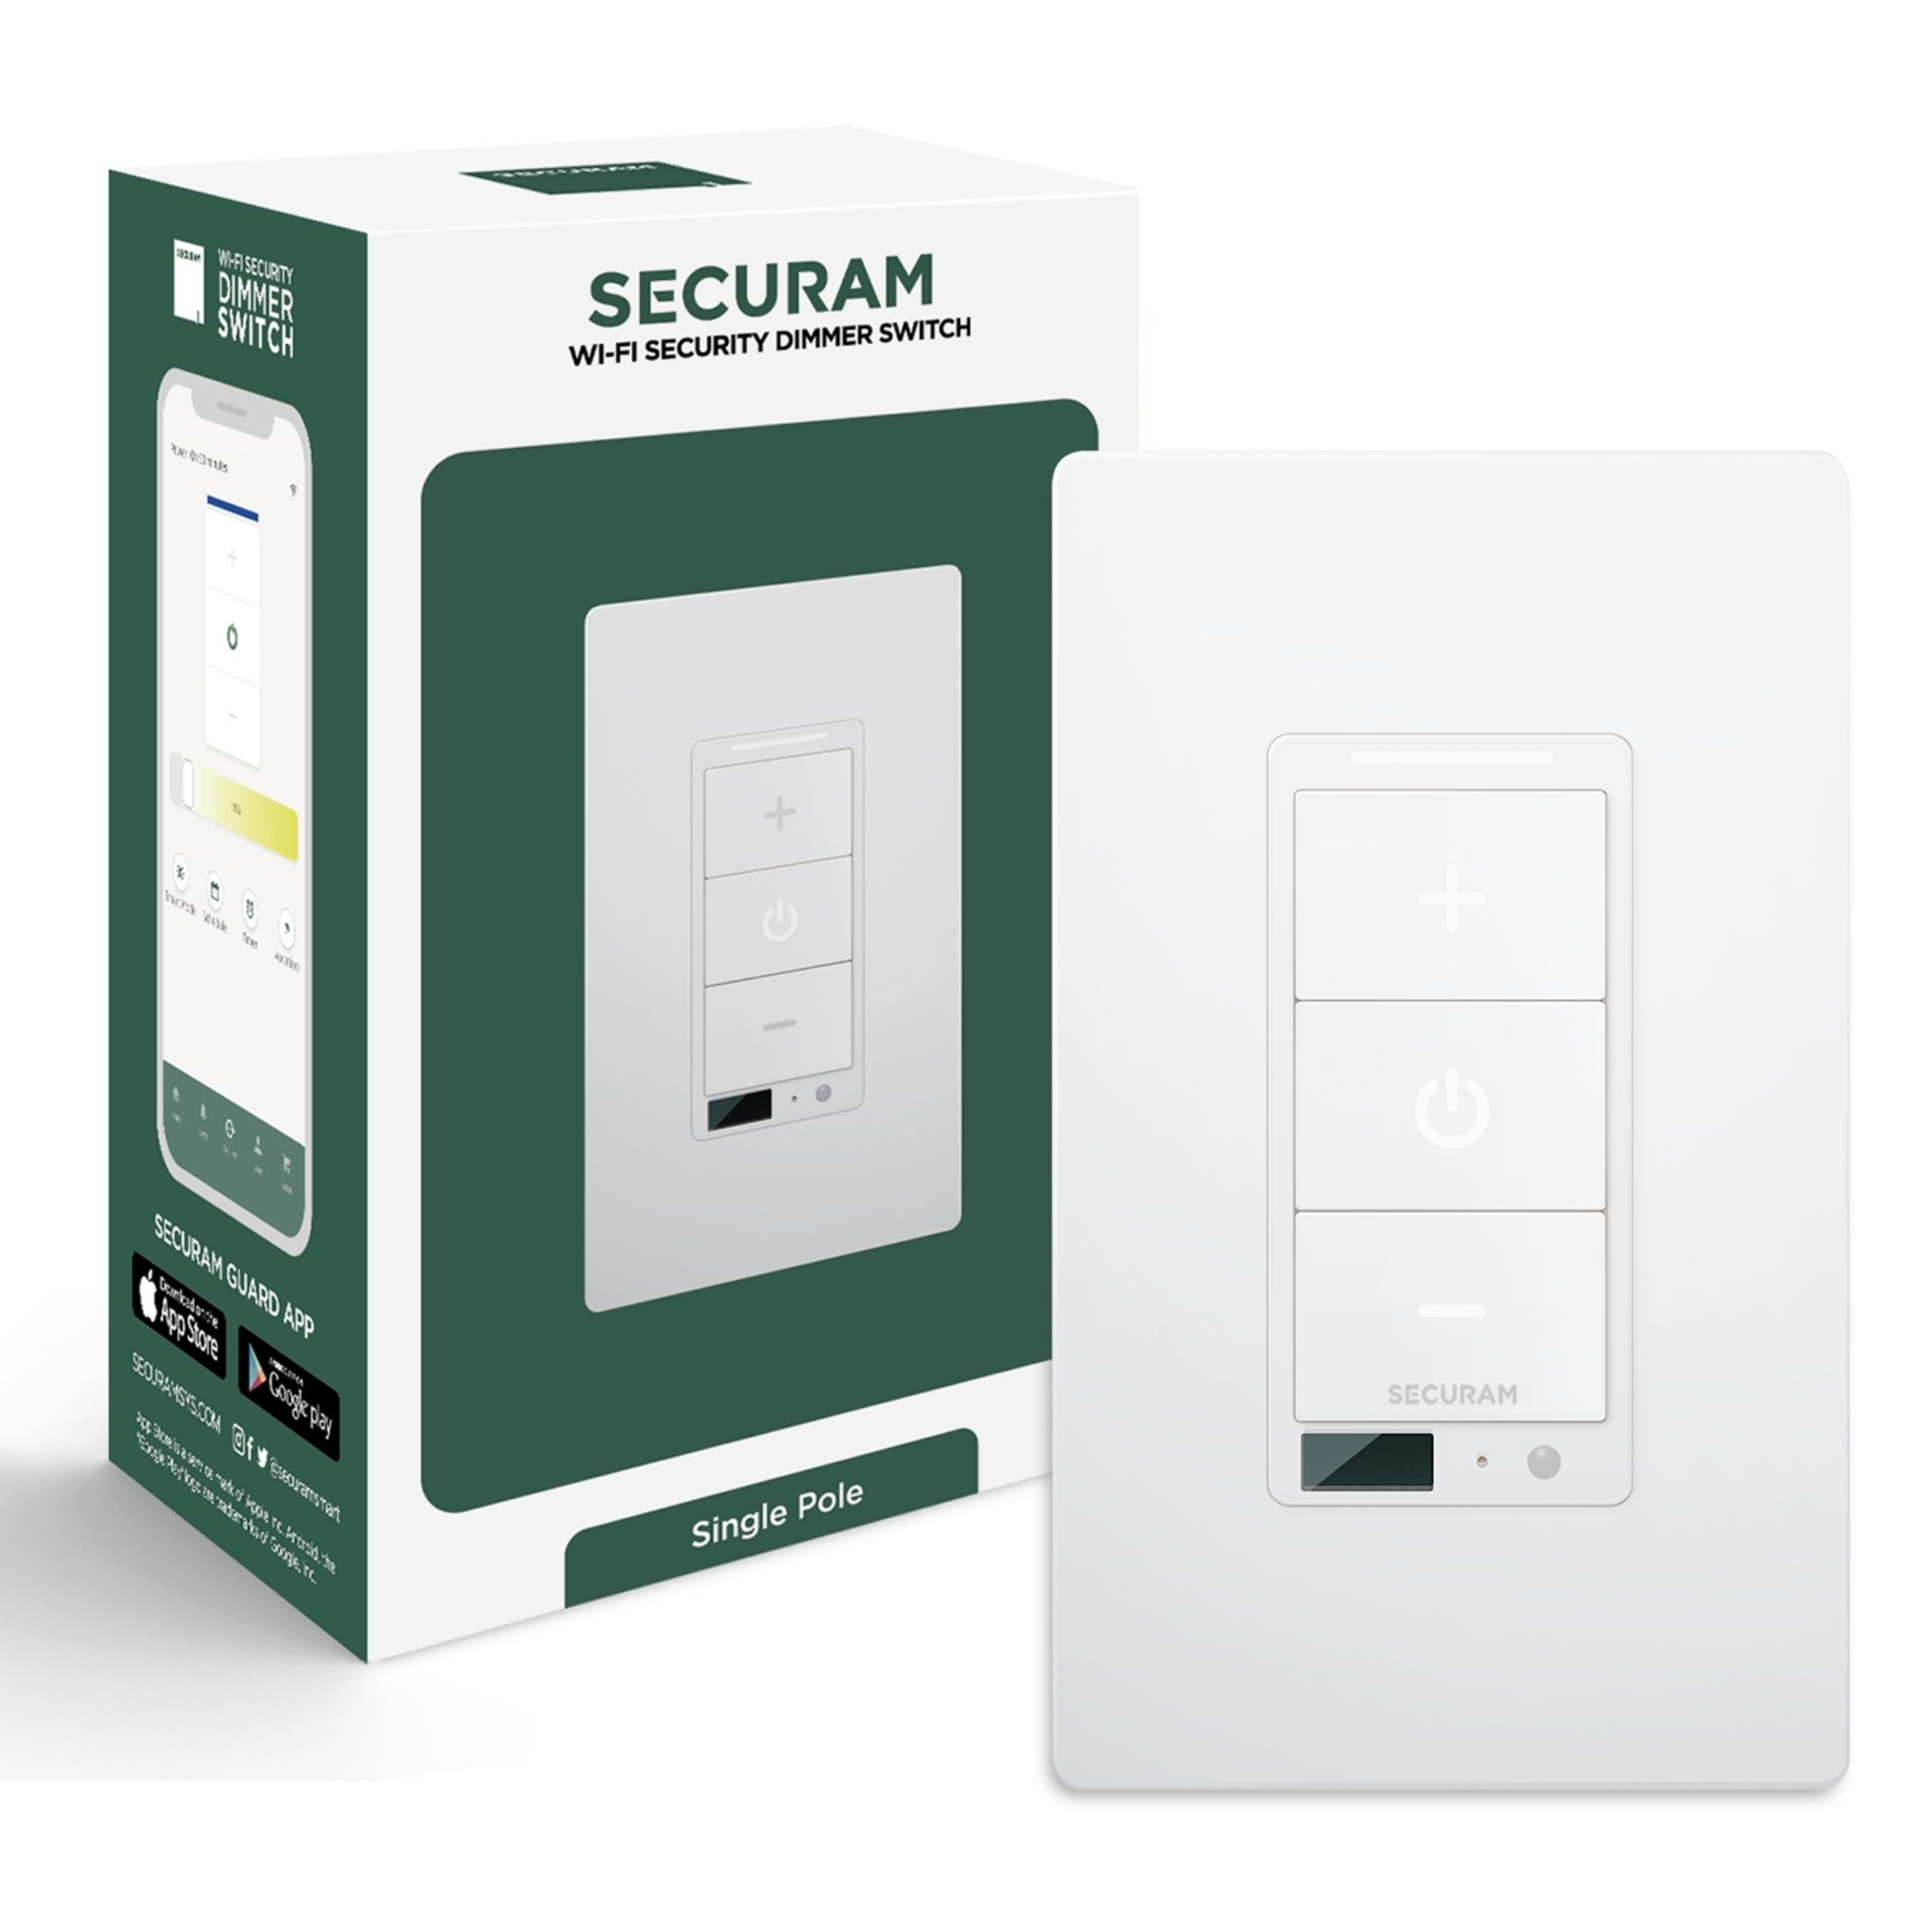 Wi-Fi Security Dimmer Switch